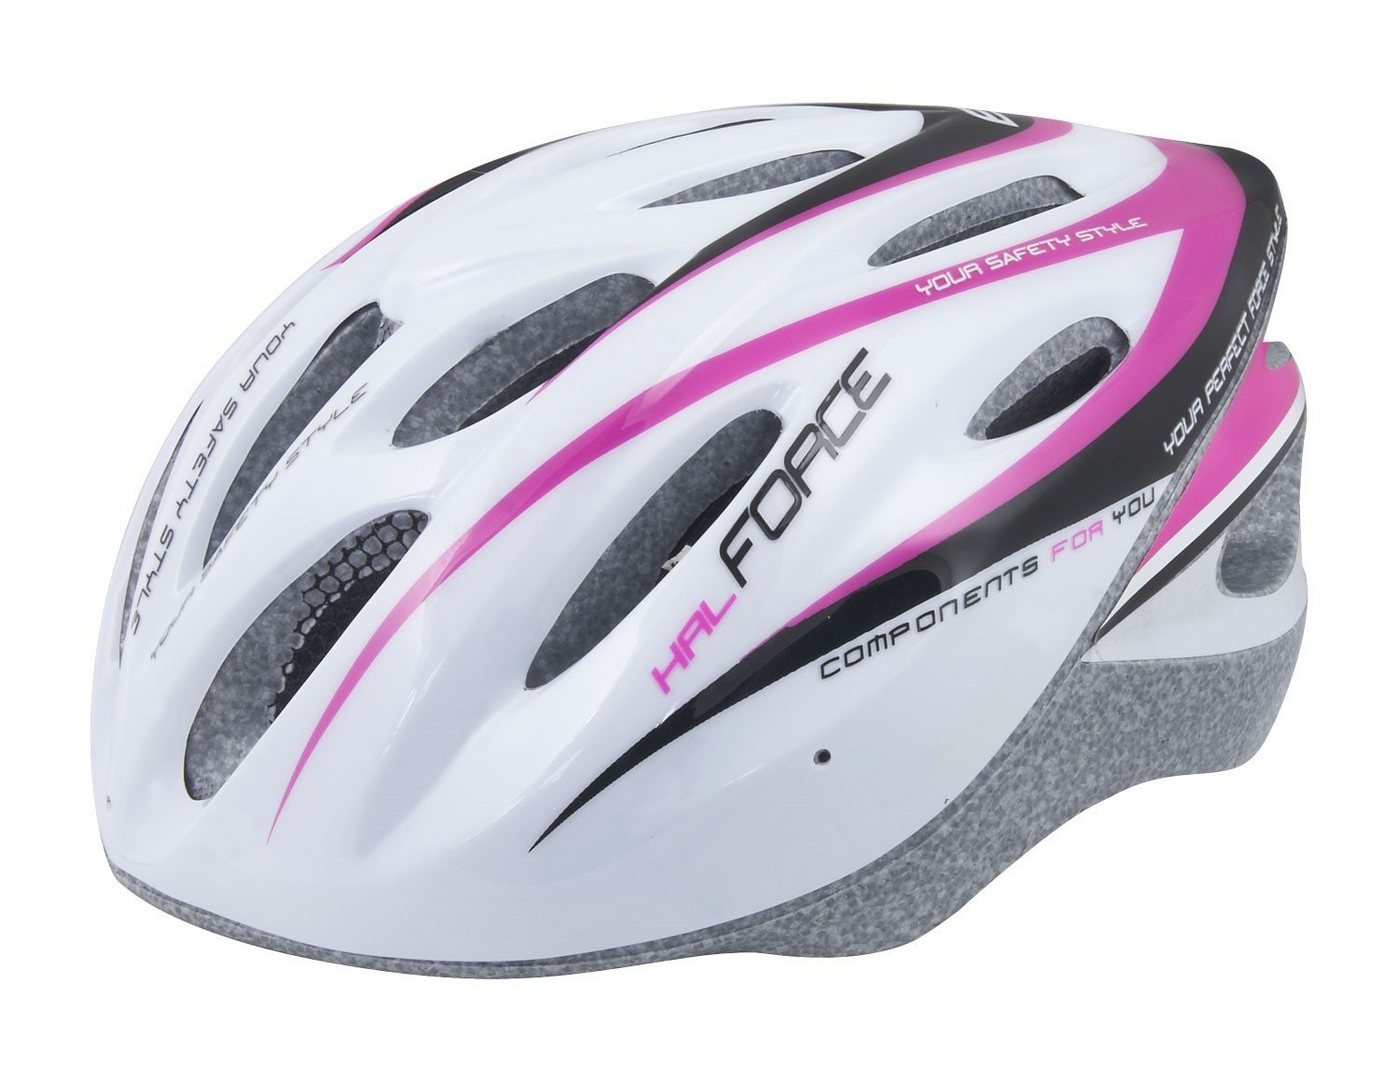 FORCE Fahrradhelm Helm FORCE HAL weiss/pinkrosa XS-S von FORCE